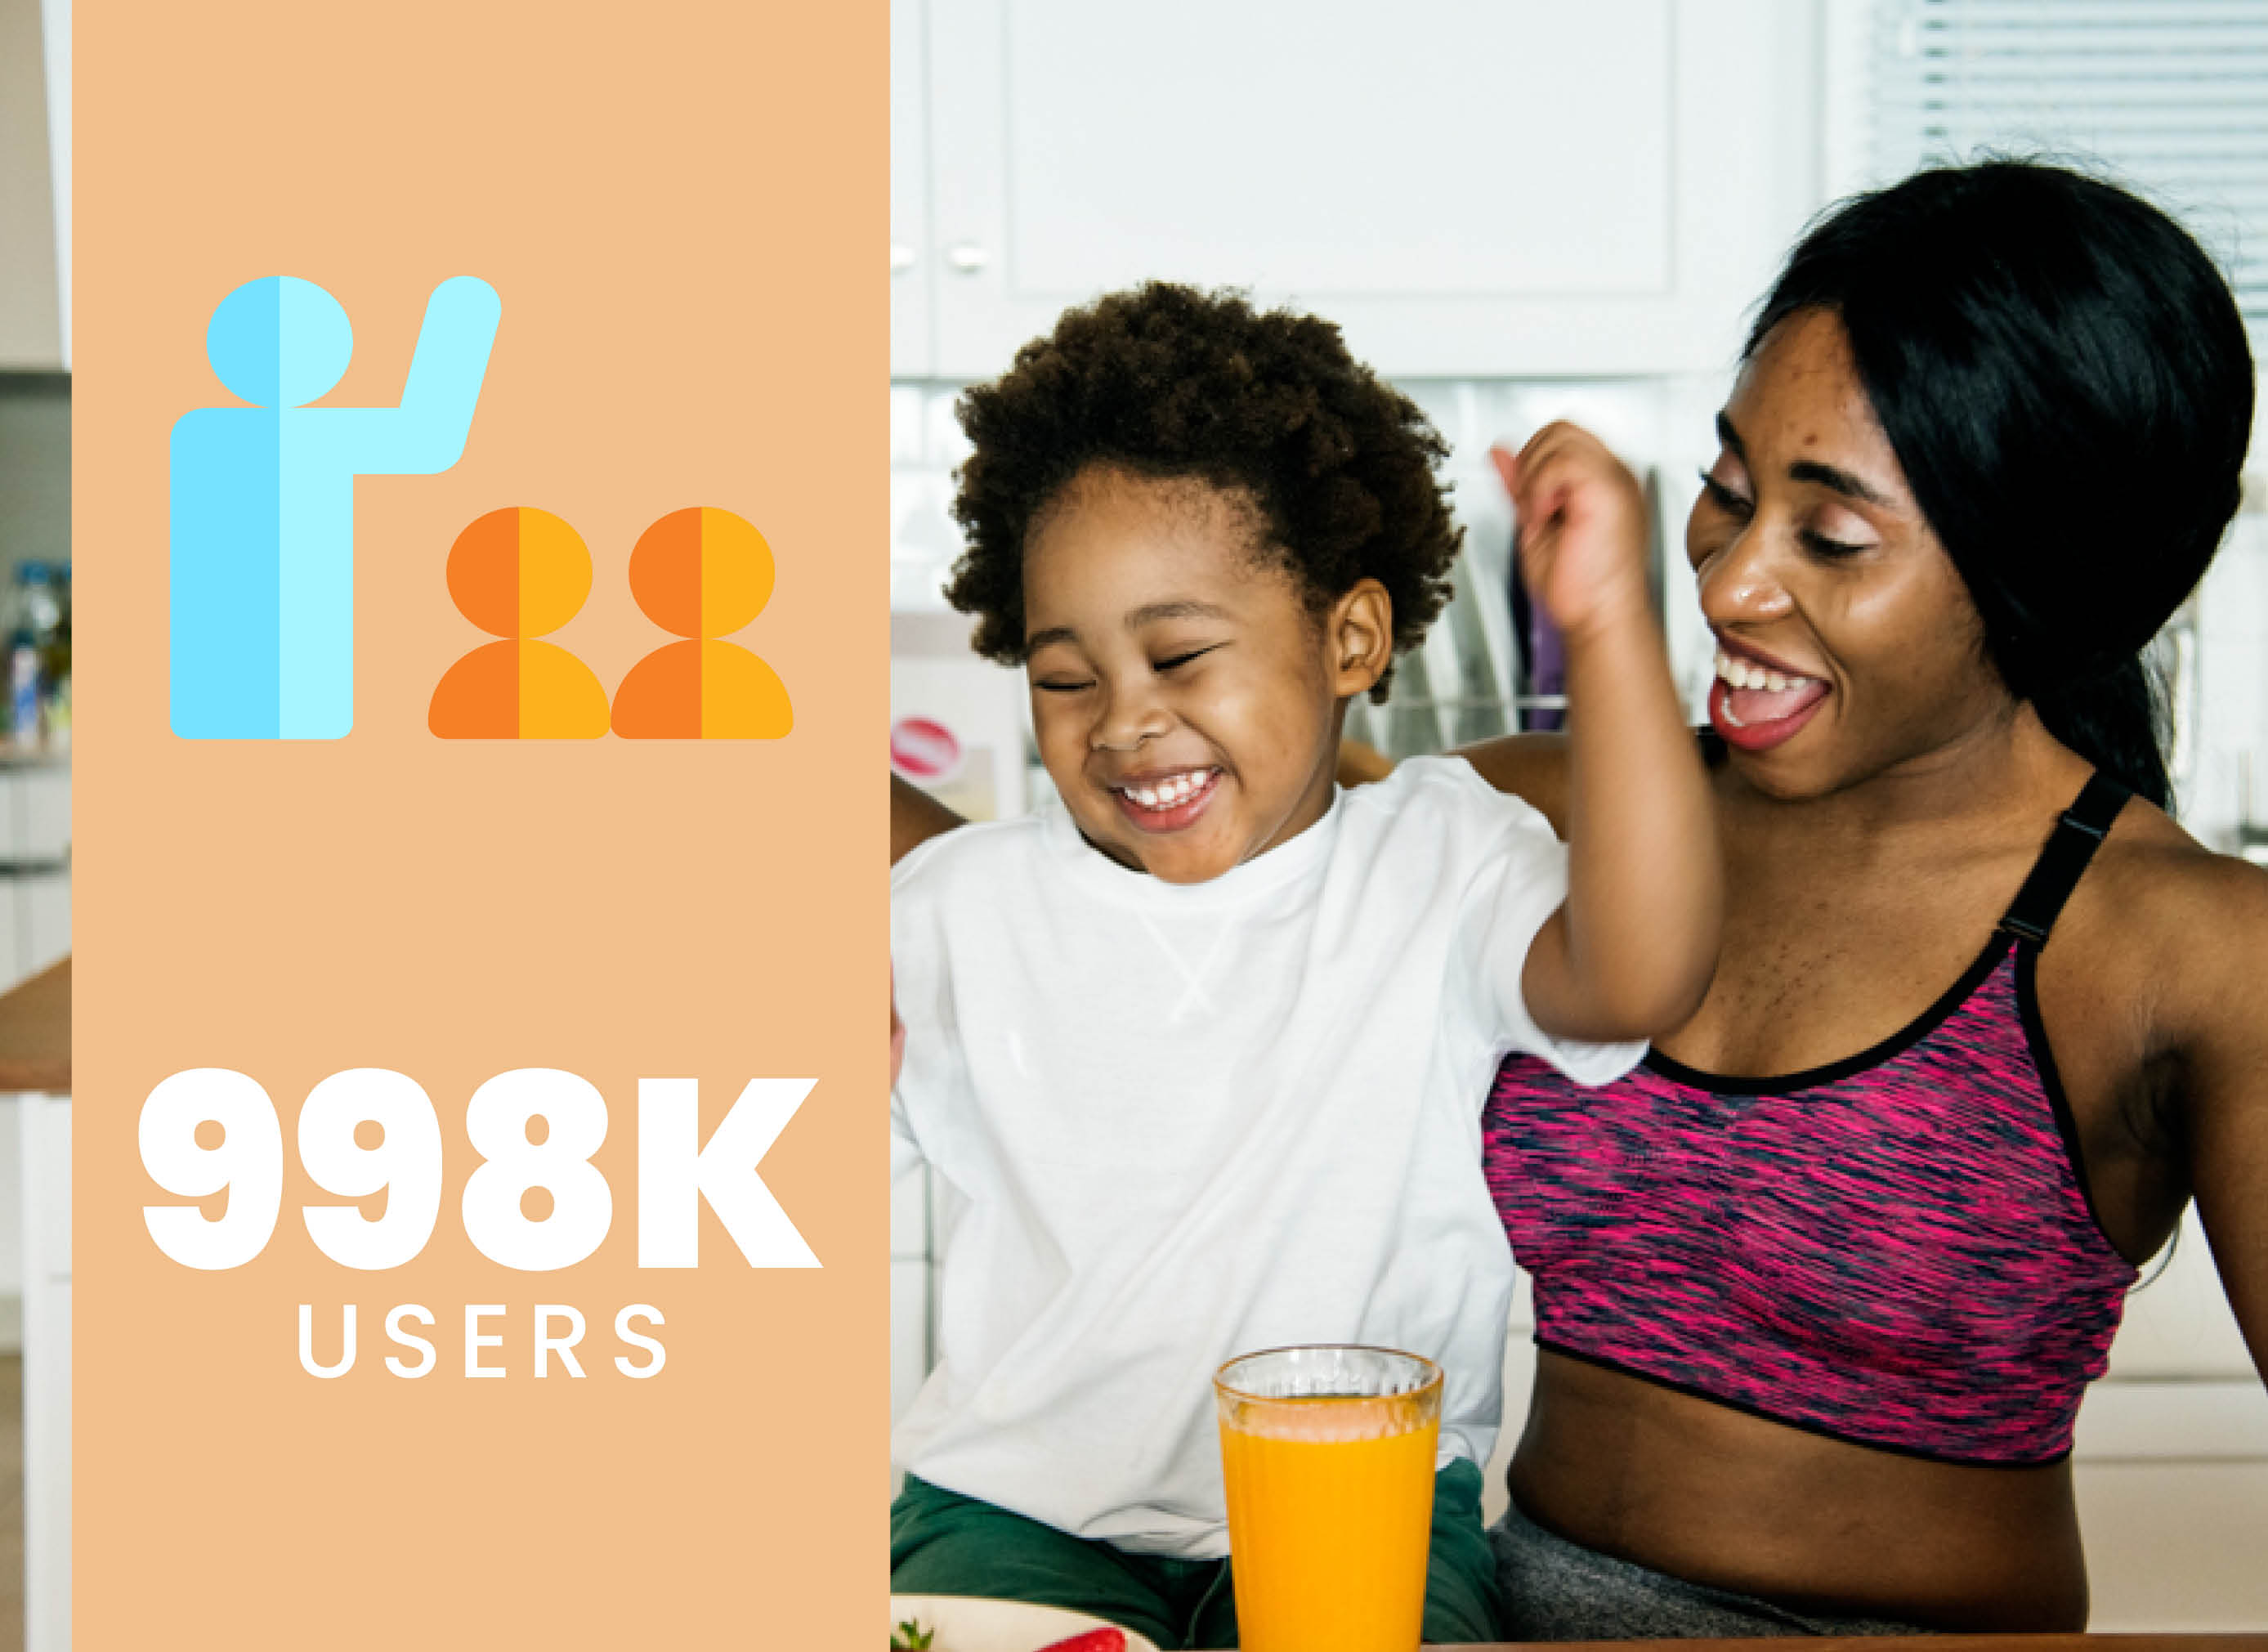 A mom smiles while her son flexes his muscles, an orange banner with 998k users on it is next to them